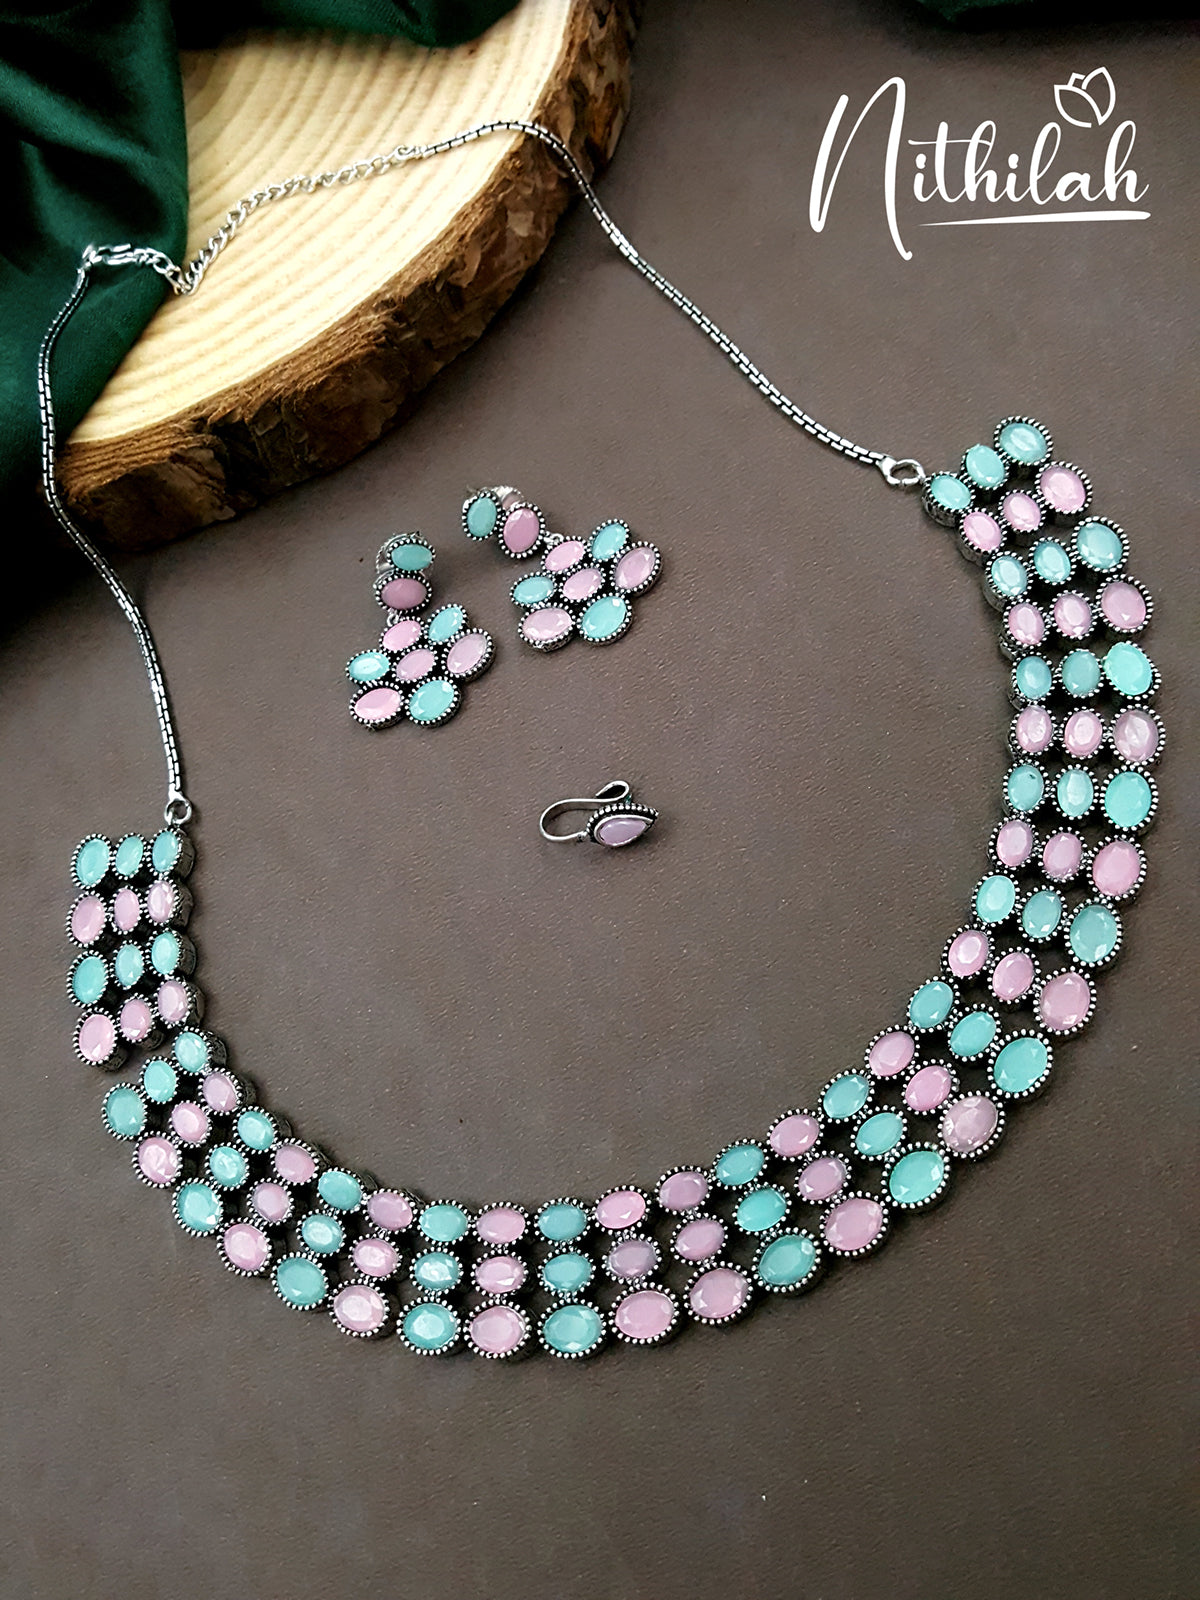 OVAL OXIDISED SILVER NECKLACE - PINK AND MINT N11N134